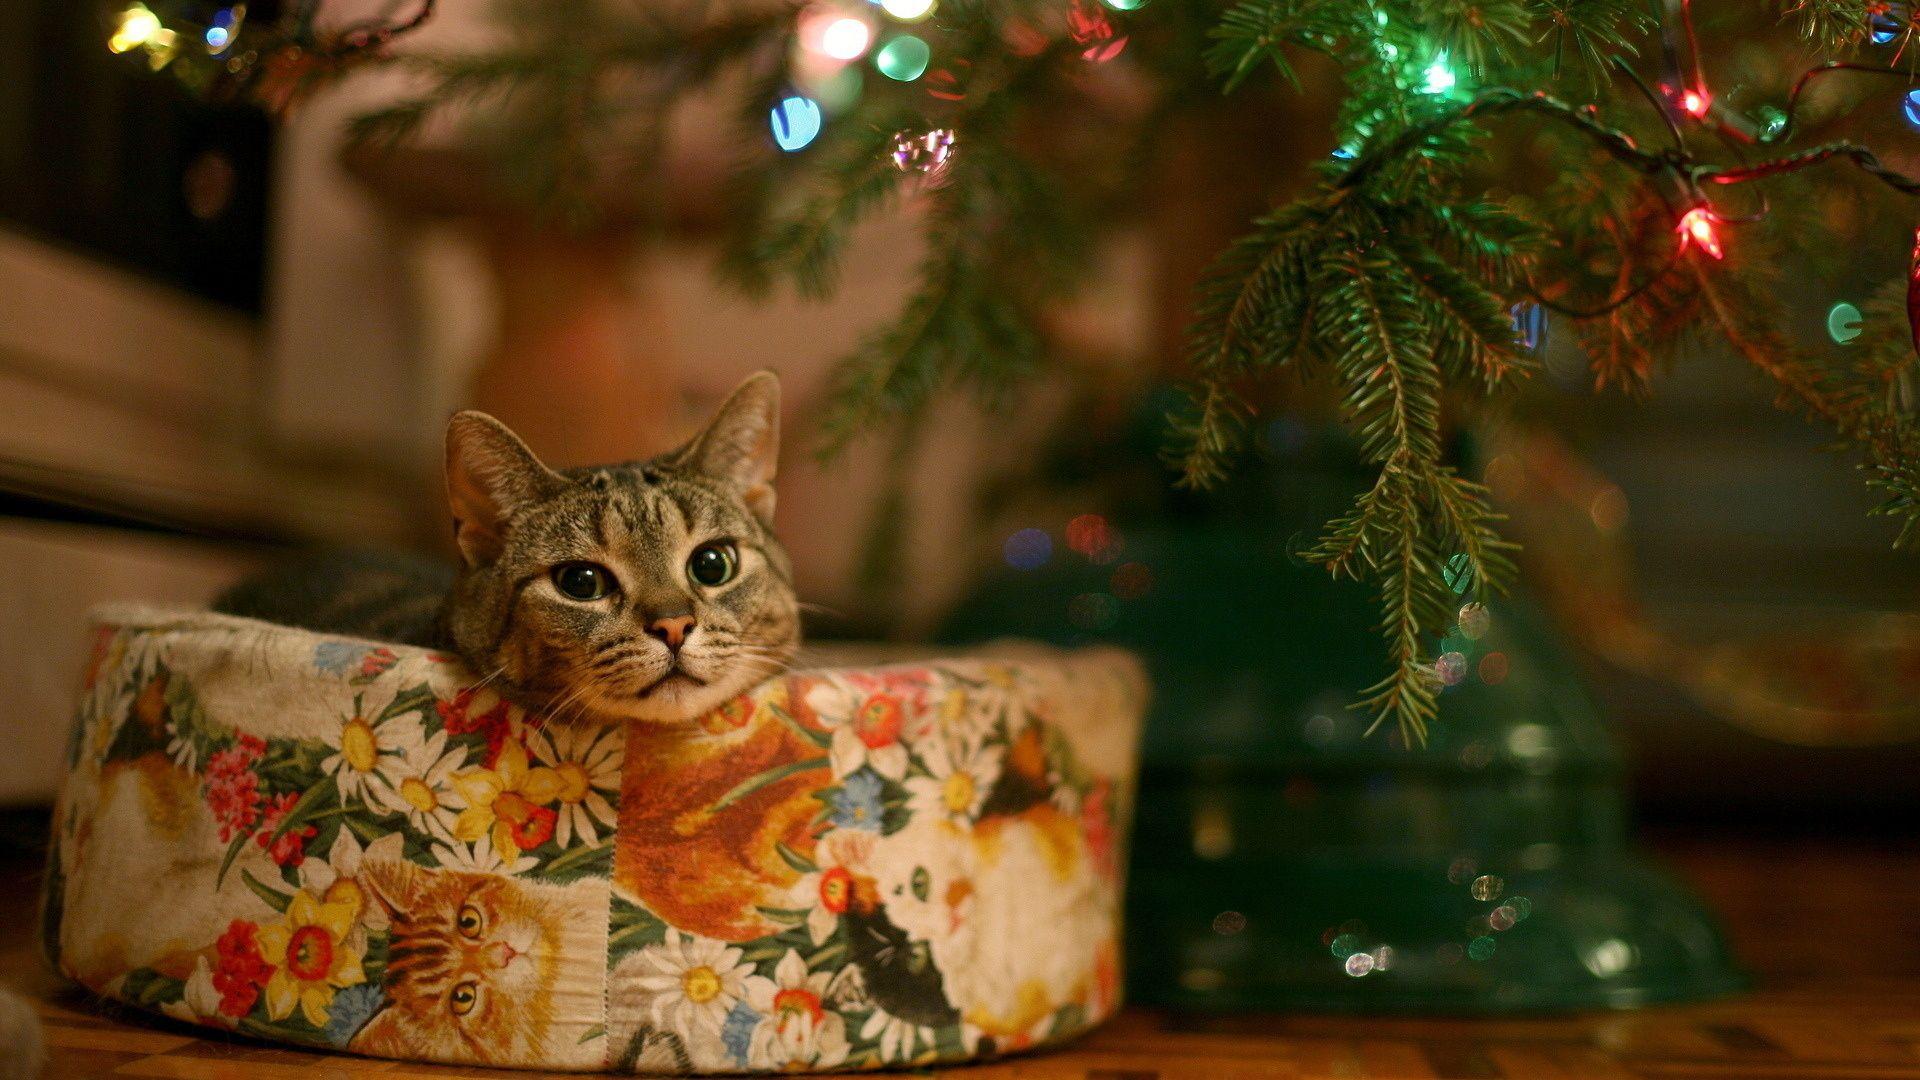 Christmas HD Wallpaper 1080p 1920x1080. Cats, Christmas cats, Cute animal picture